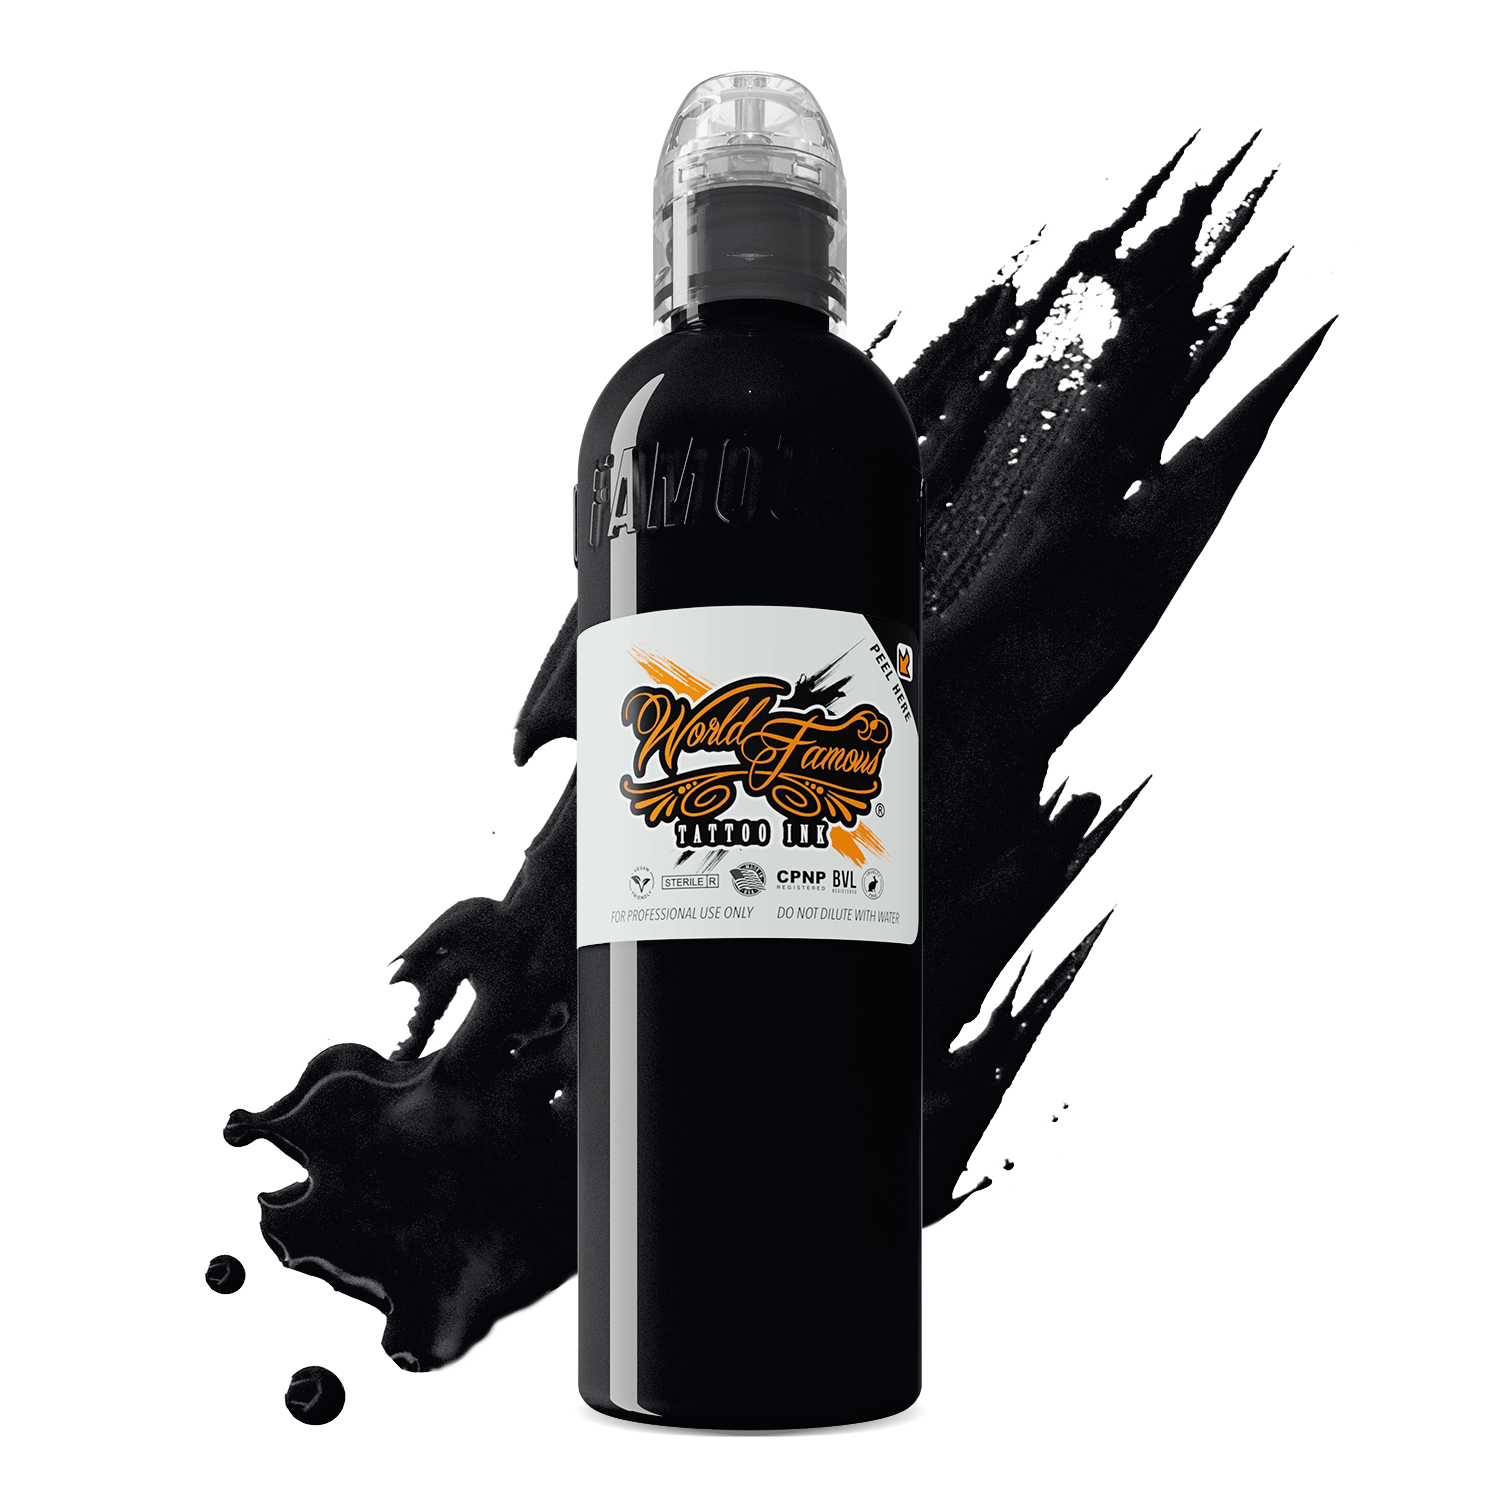 World Famous Tattoo Ink  Vegan Friendly Professional Tattooing Inks   Pancho Light Violet Purple 8 Ounce Beauty  Personal Care